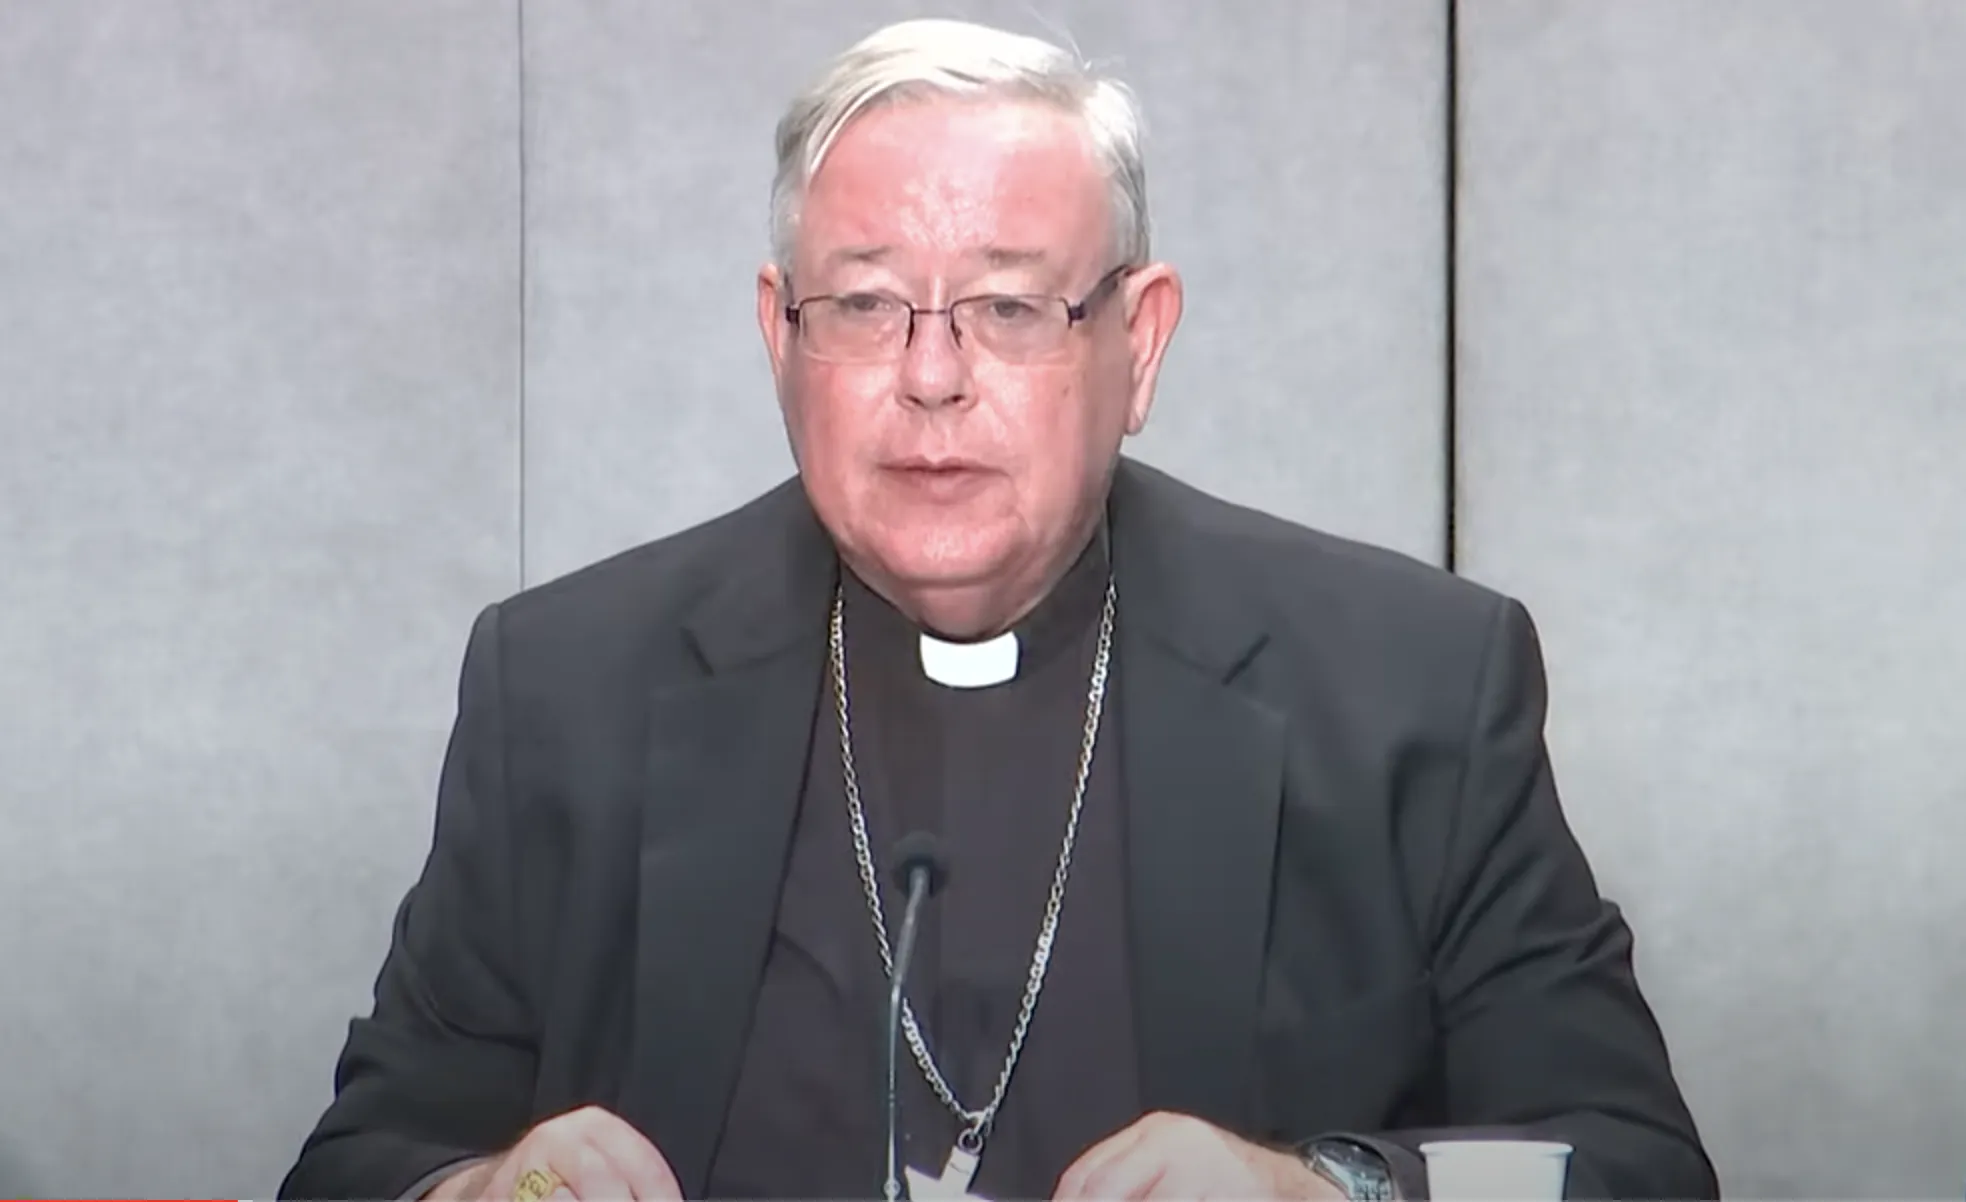 Cardinal Jean-Claude Hollerich, SJ, speaking at a press conference in the Vatican on Aug. 26, 2022.?w=200&h=150